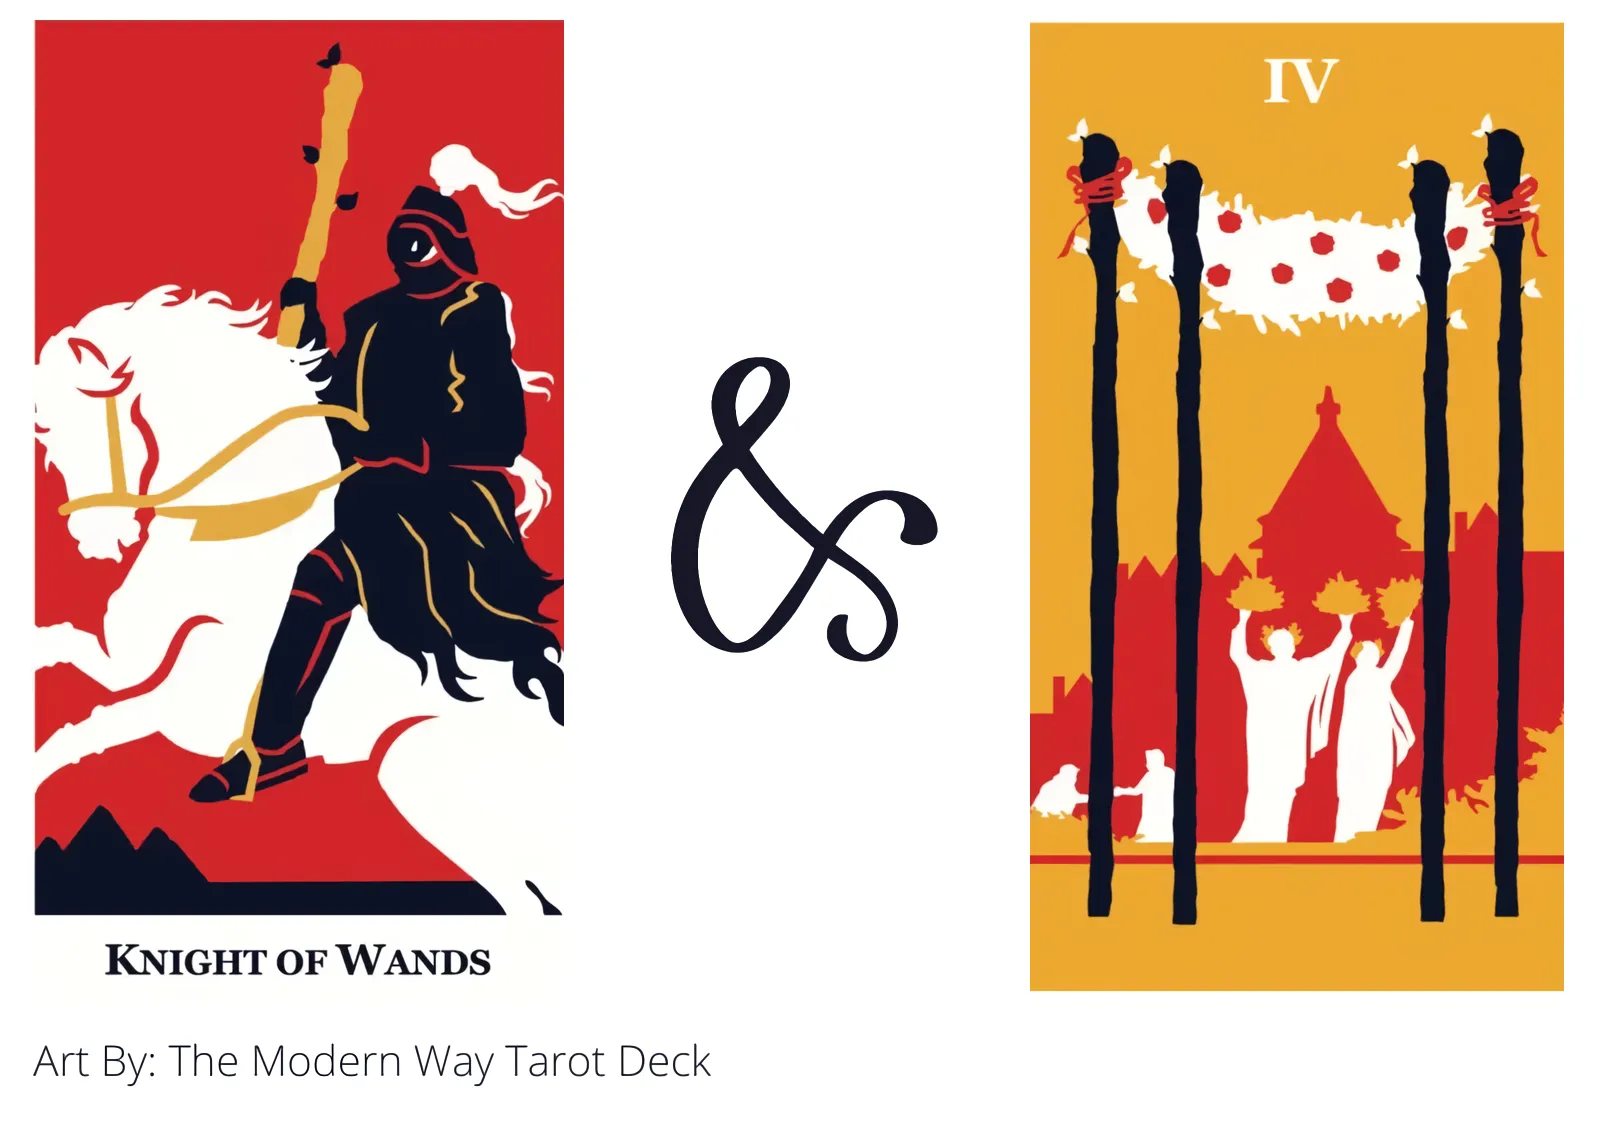 knight of wands and four of wands tarot cards together